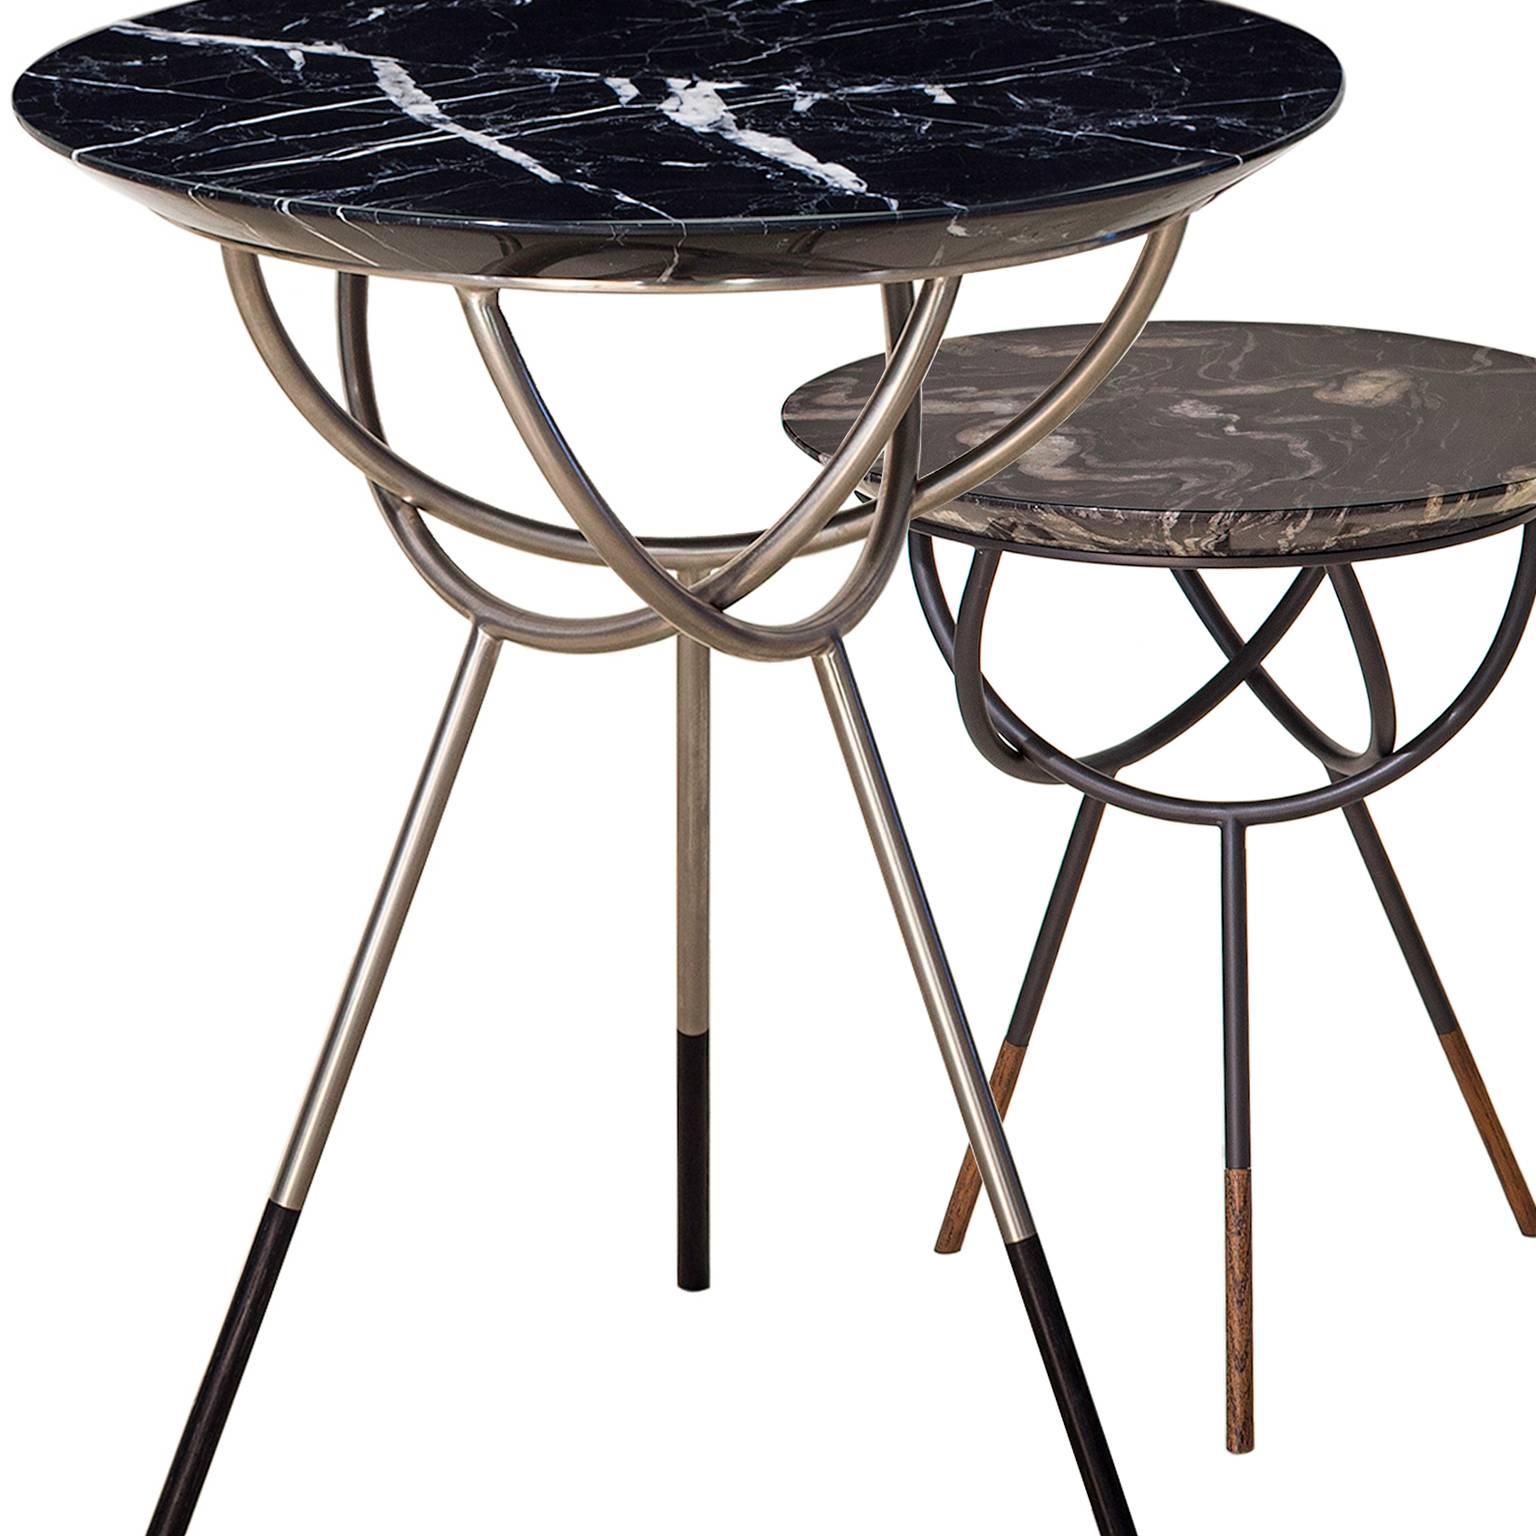 American Atlas Oil-Rubbed Bronze End Table with Black Marble Top by Avram Rusu Studio For Sale